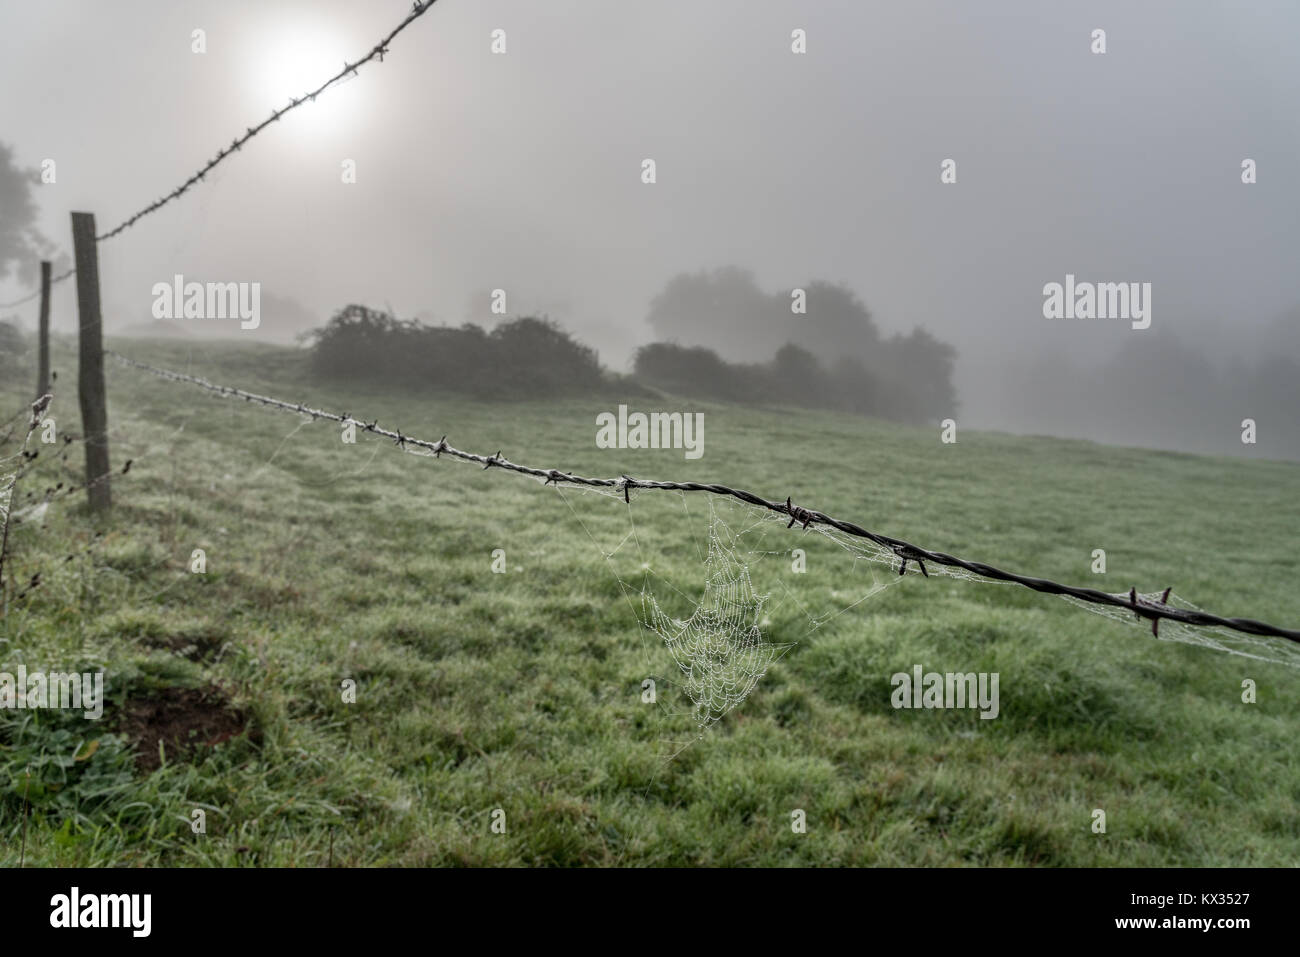 A fence made of barbed wire, a spider web covered in dew and the sun trying to pierce the fog that covers the countryside Stock Photo